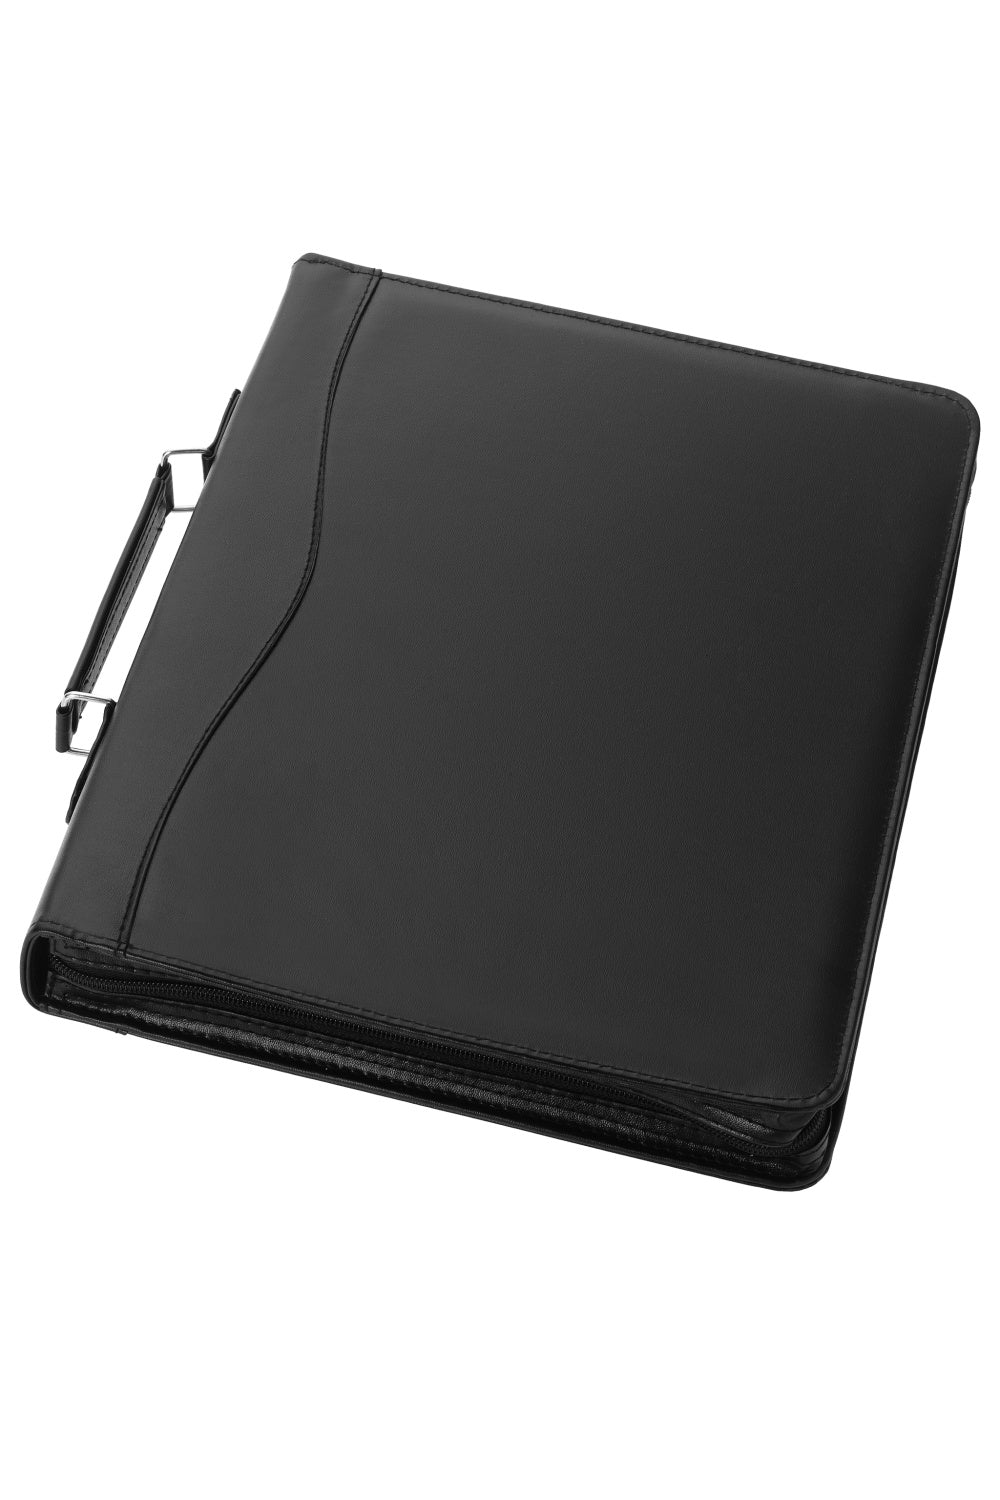 Bullet Ebony A4 Briefcase Portfolio (Pack of 2) (Solid Black) (14.4 x 10.6 x 1.8 inches)